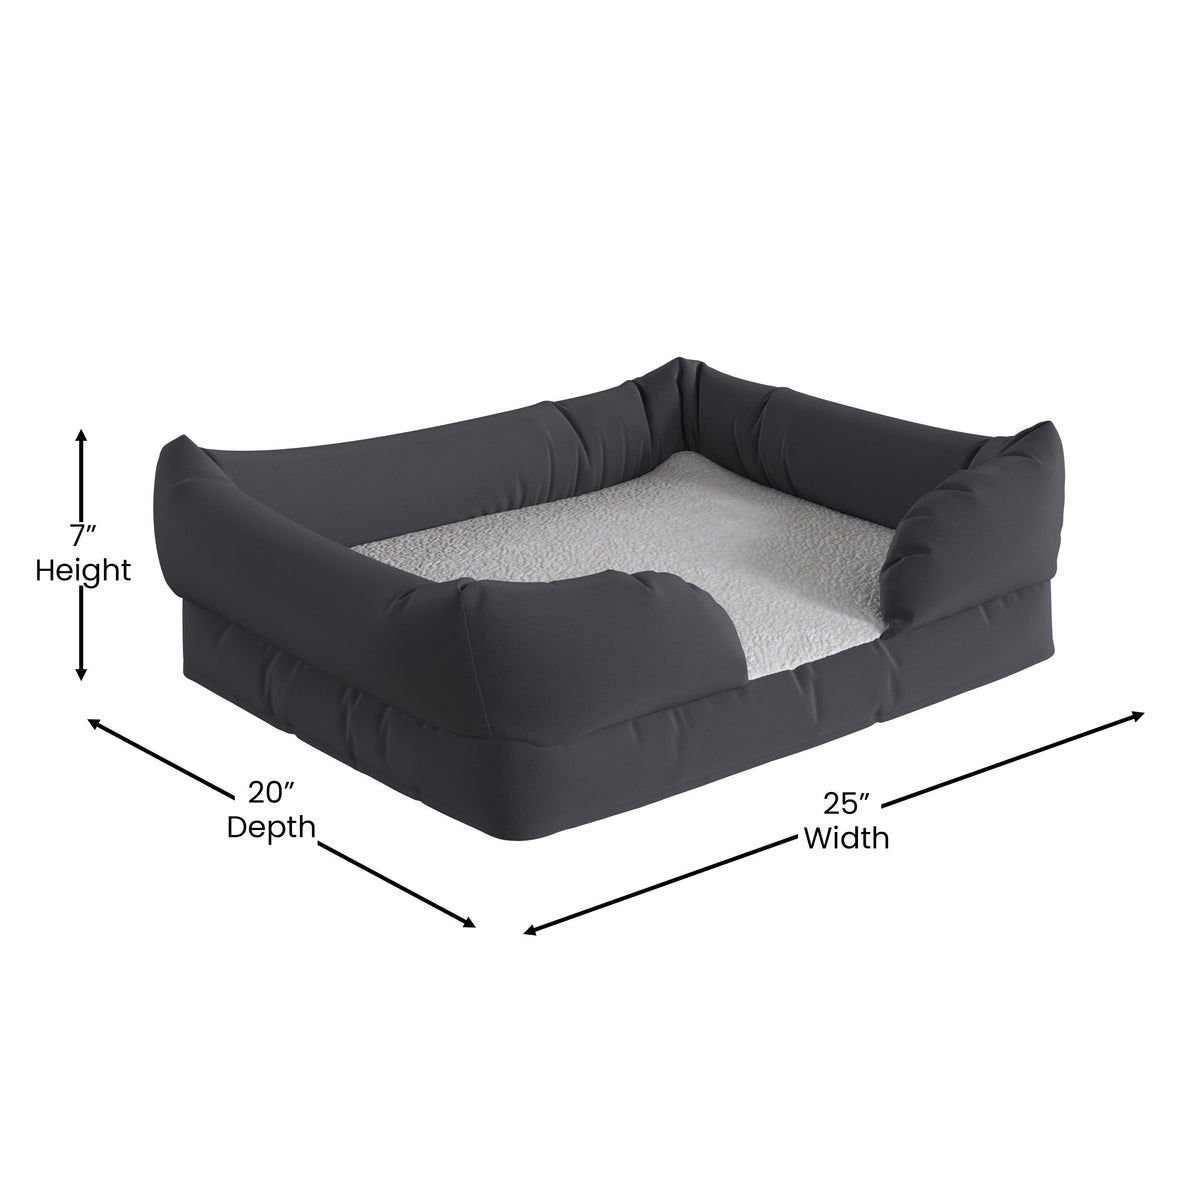 Small |#| Orthopedic 25inch x 20inch Memory Foam Dog Bed - Removable, Washable Cover-Gray